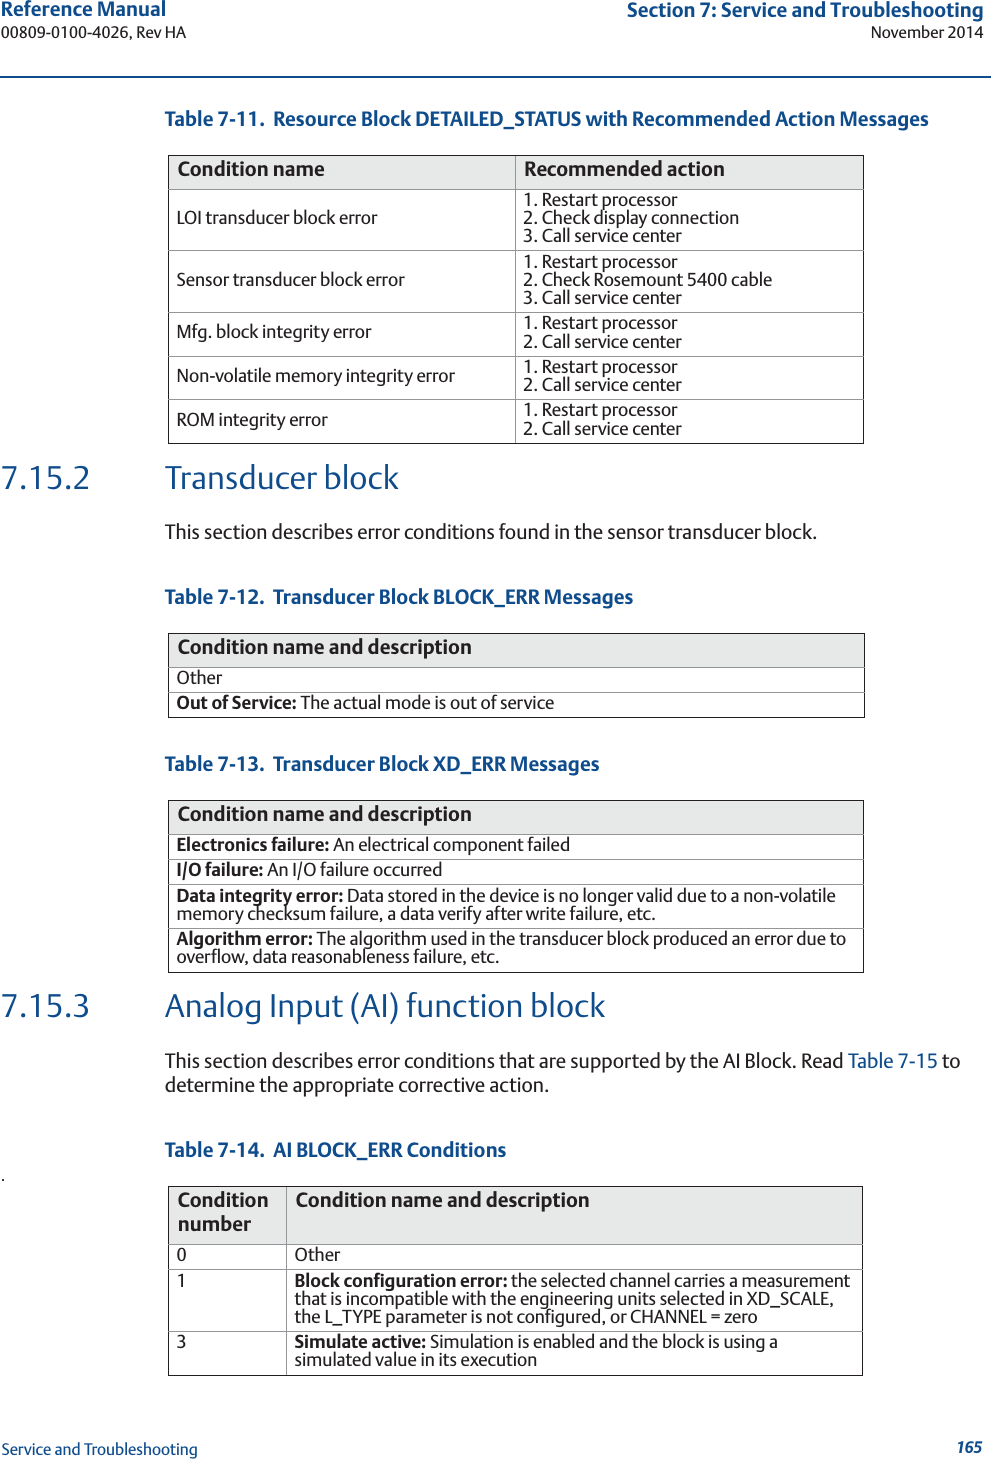 165Reference Manual 00809-0100-4026, Rev HASection 7: Service and TroubleshootingNovember 2014Service and TroubleshootingTable 7-11.  Resource Block DETAILED_STATUS with Recommended Action Messages7.15.2 Transducer blockThis section describes error conditions found in the sensor transducer block.Table 7-12.  Transducer Block BLOCK_ERR MessagesTable 7-13.  Transducer Block XD_ERR Messages7.15.3 Analog Input (AI) function blockThis section describes error conditions that are supported by the AI Block. Read Table 7-15 to determine the appropriate corrective action.Table 7-14.  AI BLOCK_ERR Conditions.Condition name Recommended actionLOI transducer block error 1. Restart processor2. Check display connection3. Call service center Sensor transducer block error 1. Restart processor2. Check Rosemount 5400 cable3. Call service center Mfg. block integrity error 1. Restart processor2. Call service center Non-volatile memory integrity error 1. Restart processor2. Call service center ROM integrity error 1. Restart processor2. Call service center Condition name and descriptionOtherOut of Service: The actual mode is out of serviceCondition name and descriptionElectronics failure: An electrical component failedI/O failure: An I/O failure occurredData integrity error: Data stored in the device is no longer valid due to a non-volatile memory checksum failure, a data verify after write failure, etc.Algorithm error: The algorithm used in the transducer block produced an error due to overflow, data reasonableness failure, etc.Condition numberCondition name and description0Other1Block configuration error: the selected channel carries a measurement that is incompatible with the engineering units selected in XD_SCALE, the L_TYPE parameter is not configured, or CHANNEL = zero3Simulate active: Simulation is enabled and the block is using a simulated value in its execution